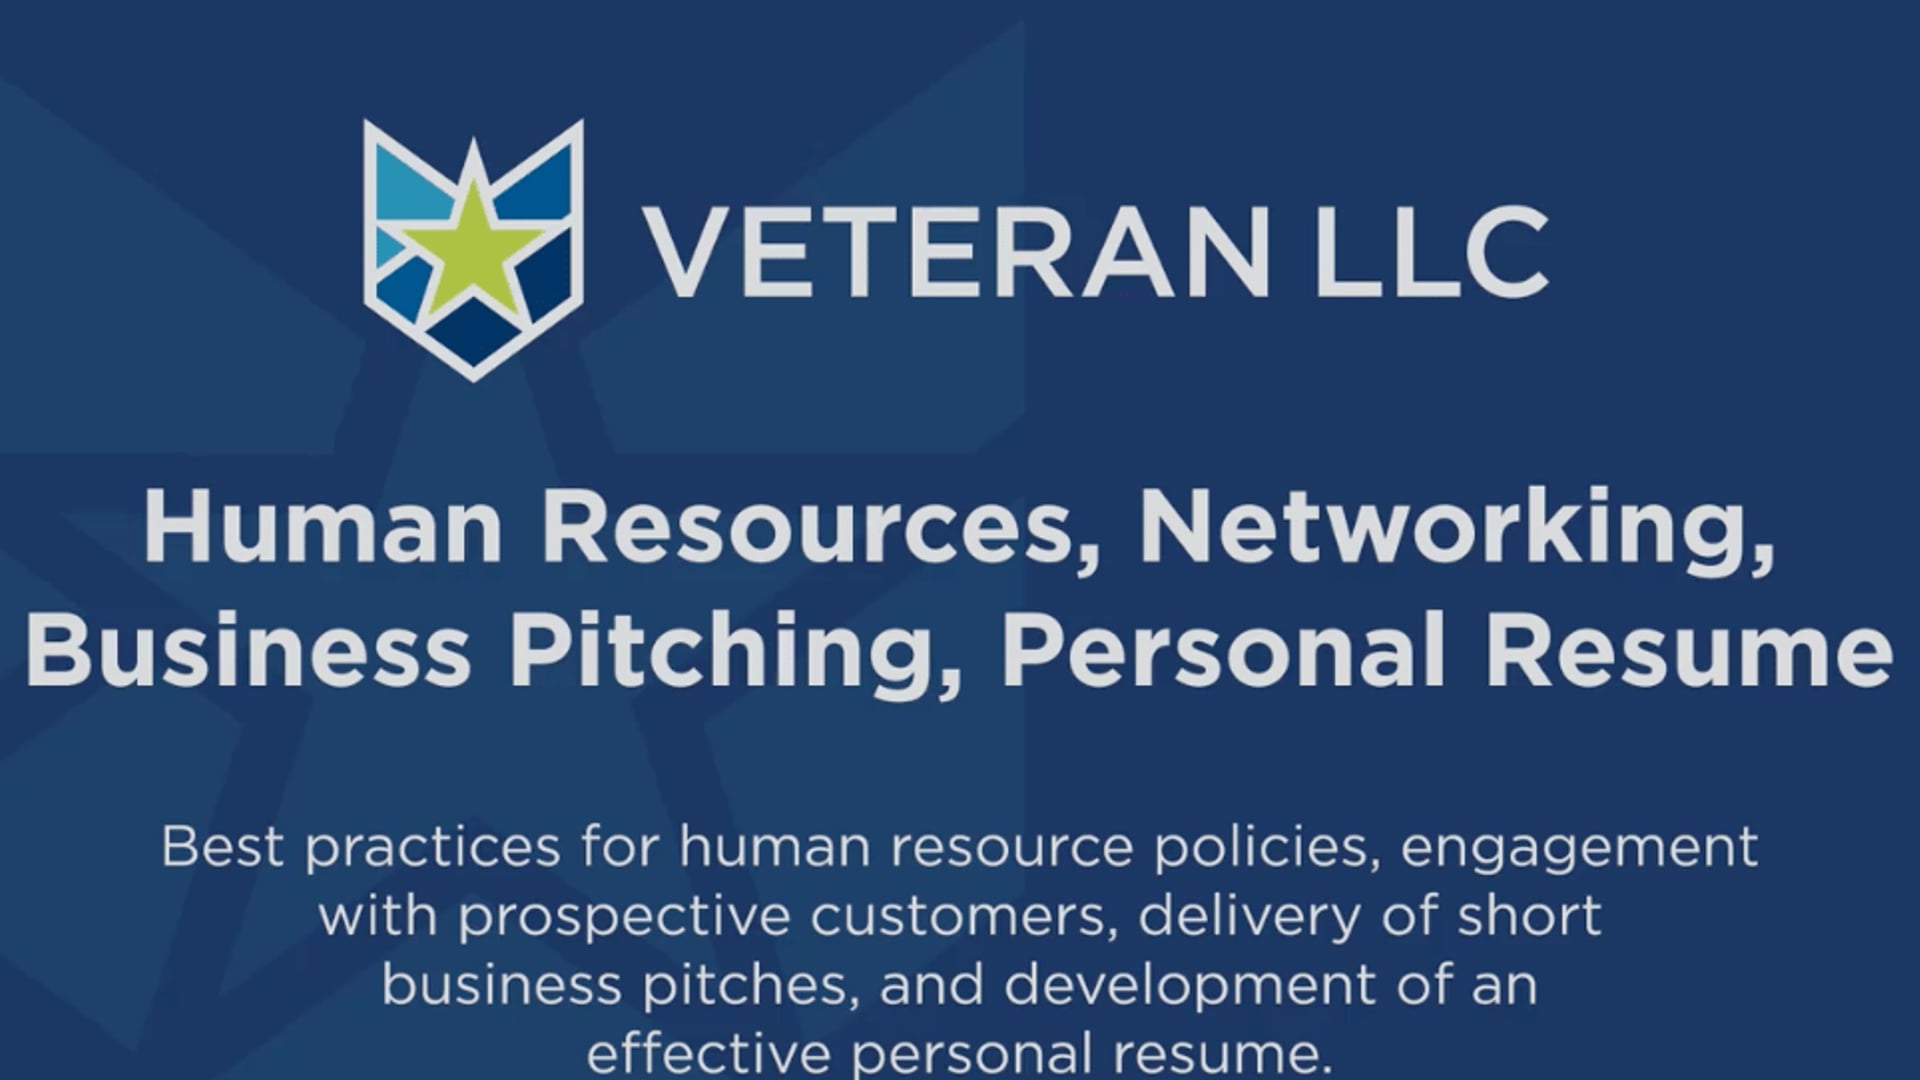 Veteran LLC - Human Resources, Networking, Business Pitching, Personal Resume